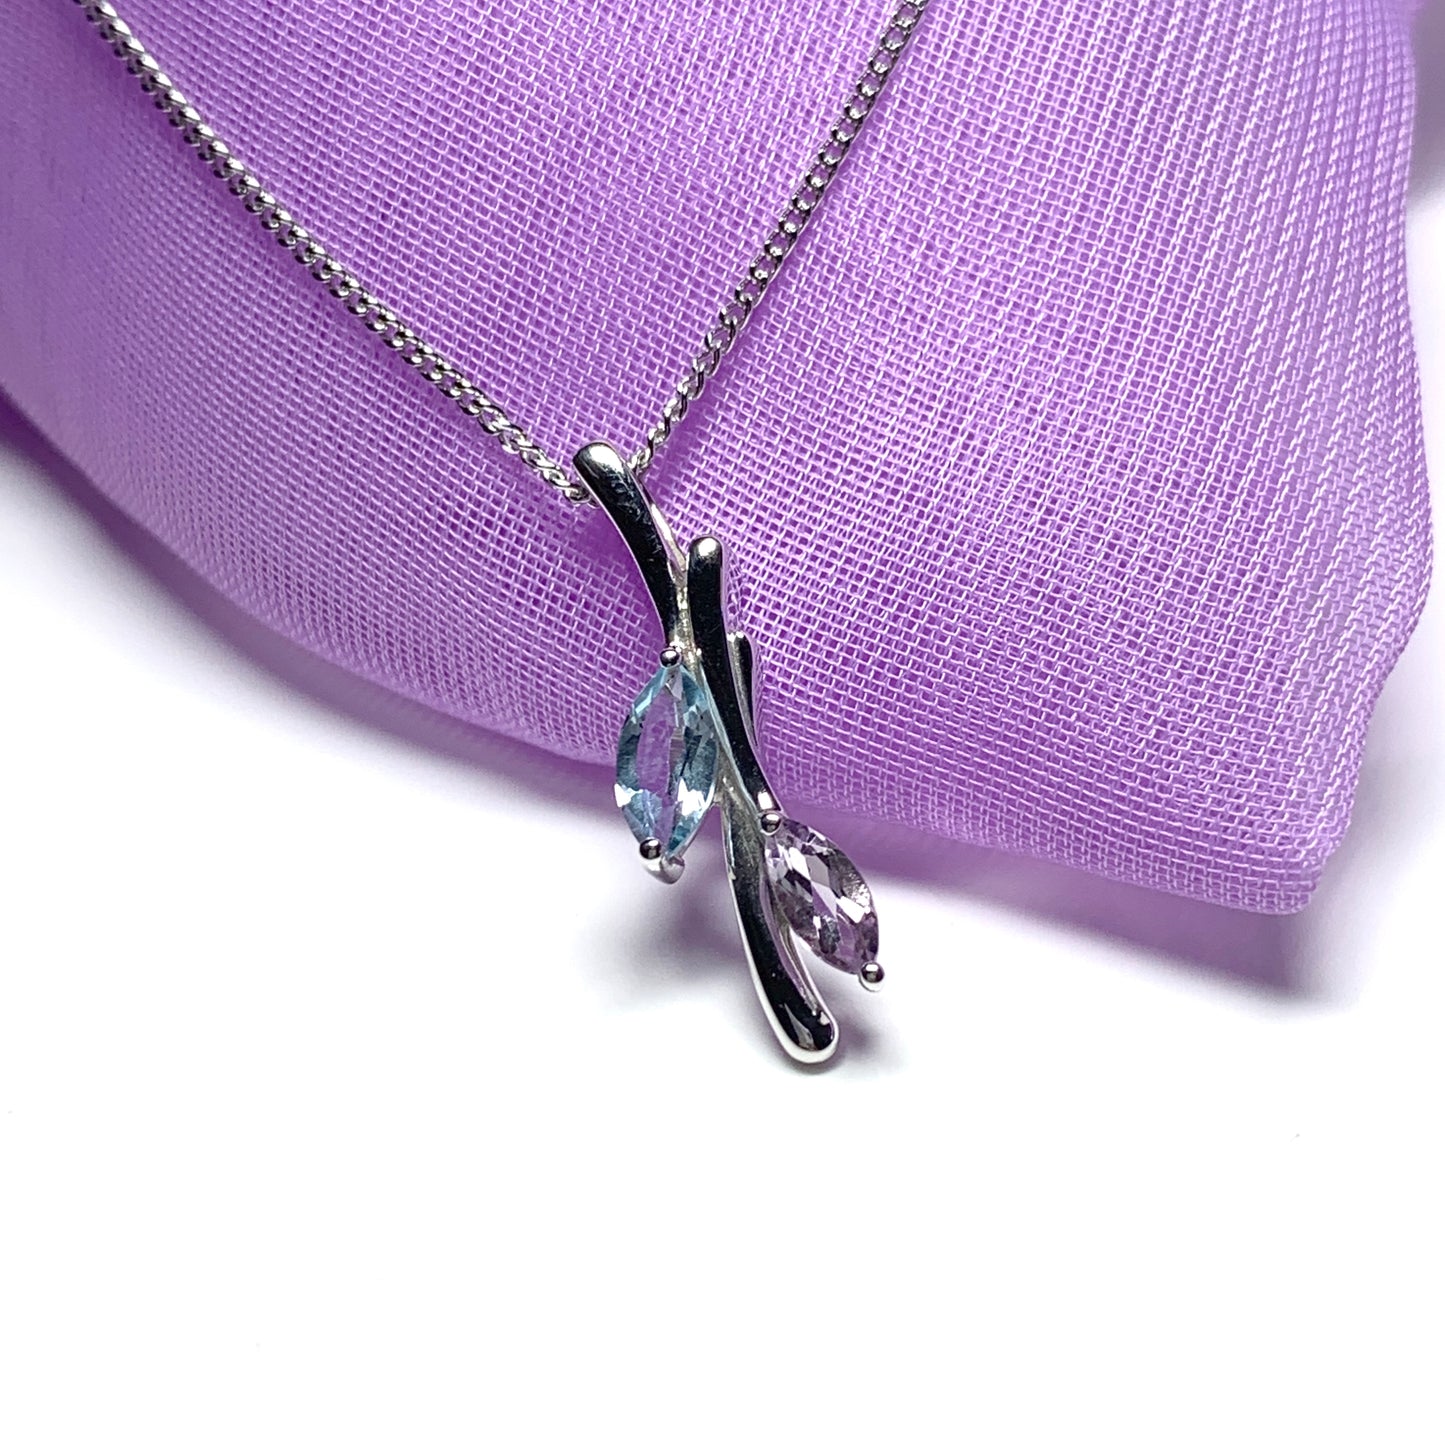 Amethyst and blue topaz swirl necklace pendant